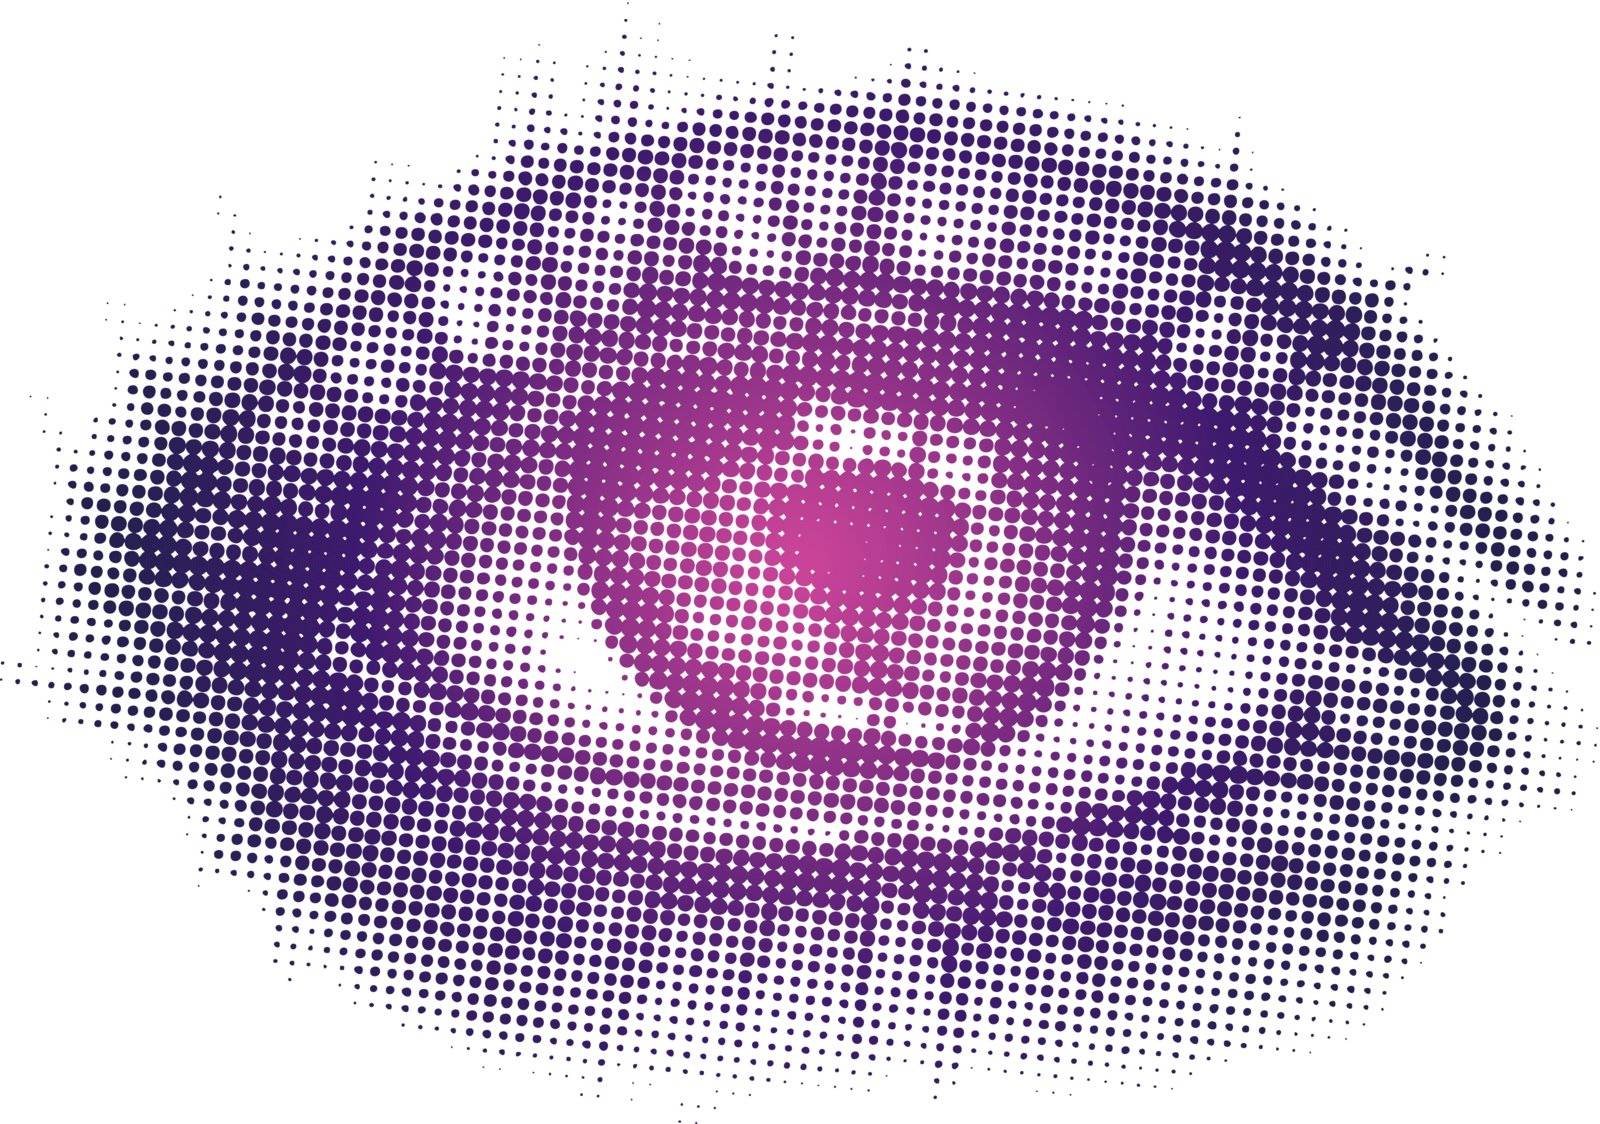 Isolated vector art of single eye in halftone pattern